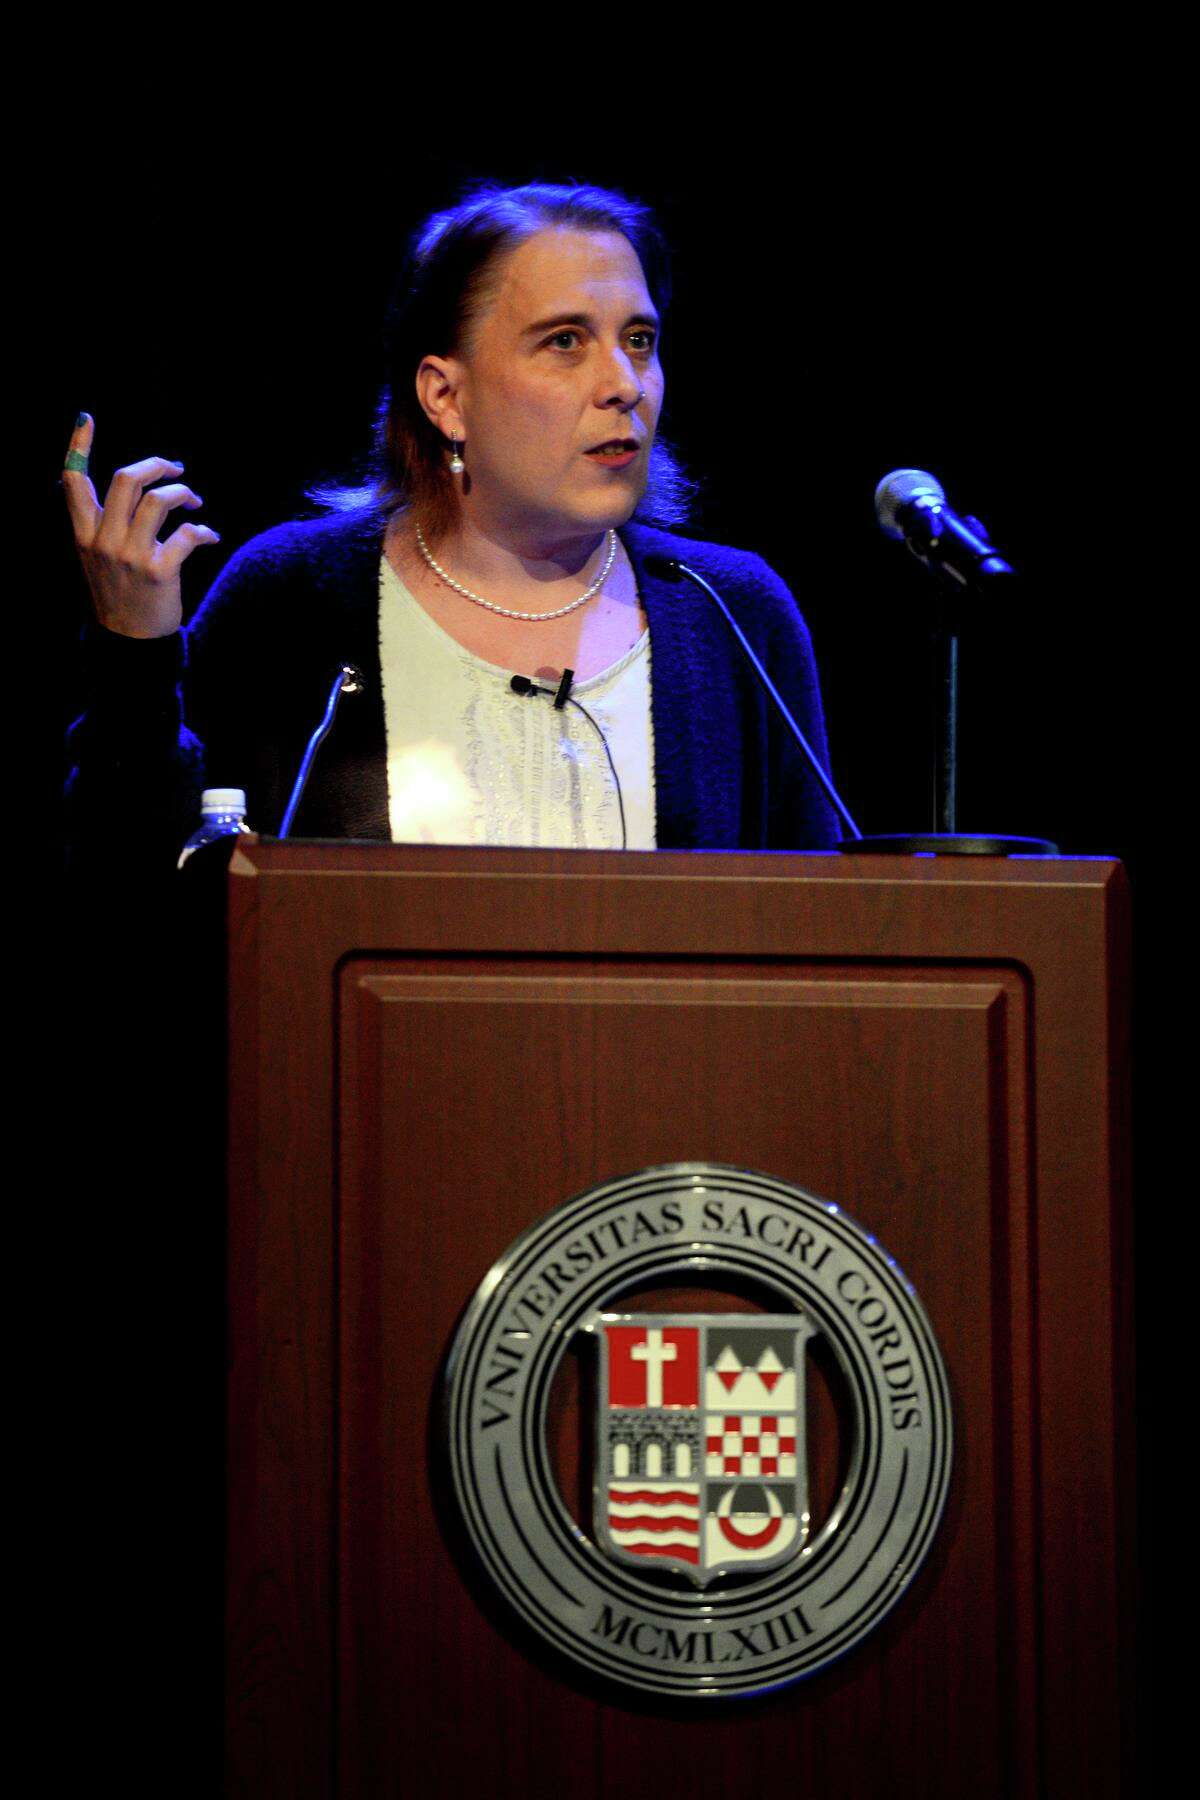 40-game Jeopardy! winner Amy Schneider speaks during a lecture at Sacred Heart University, in Fairfield, Conn. March 23, 2022.